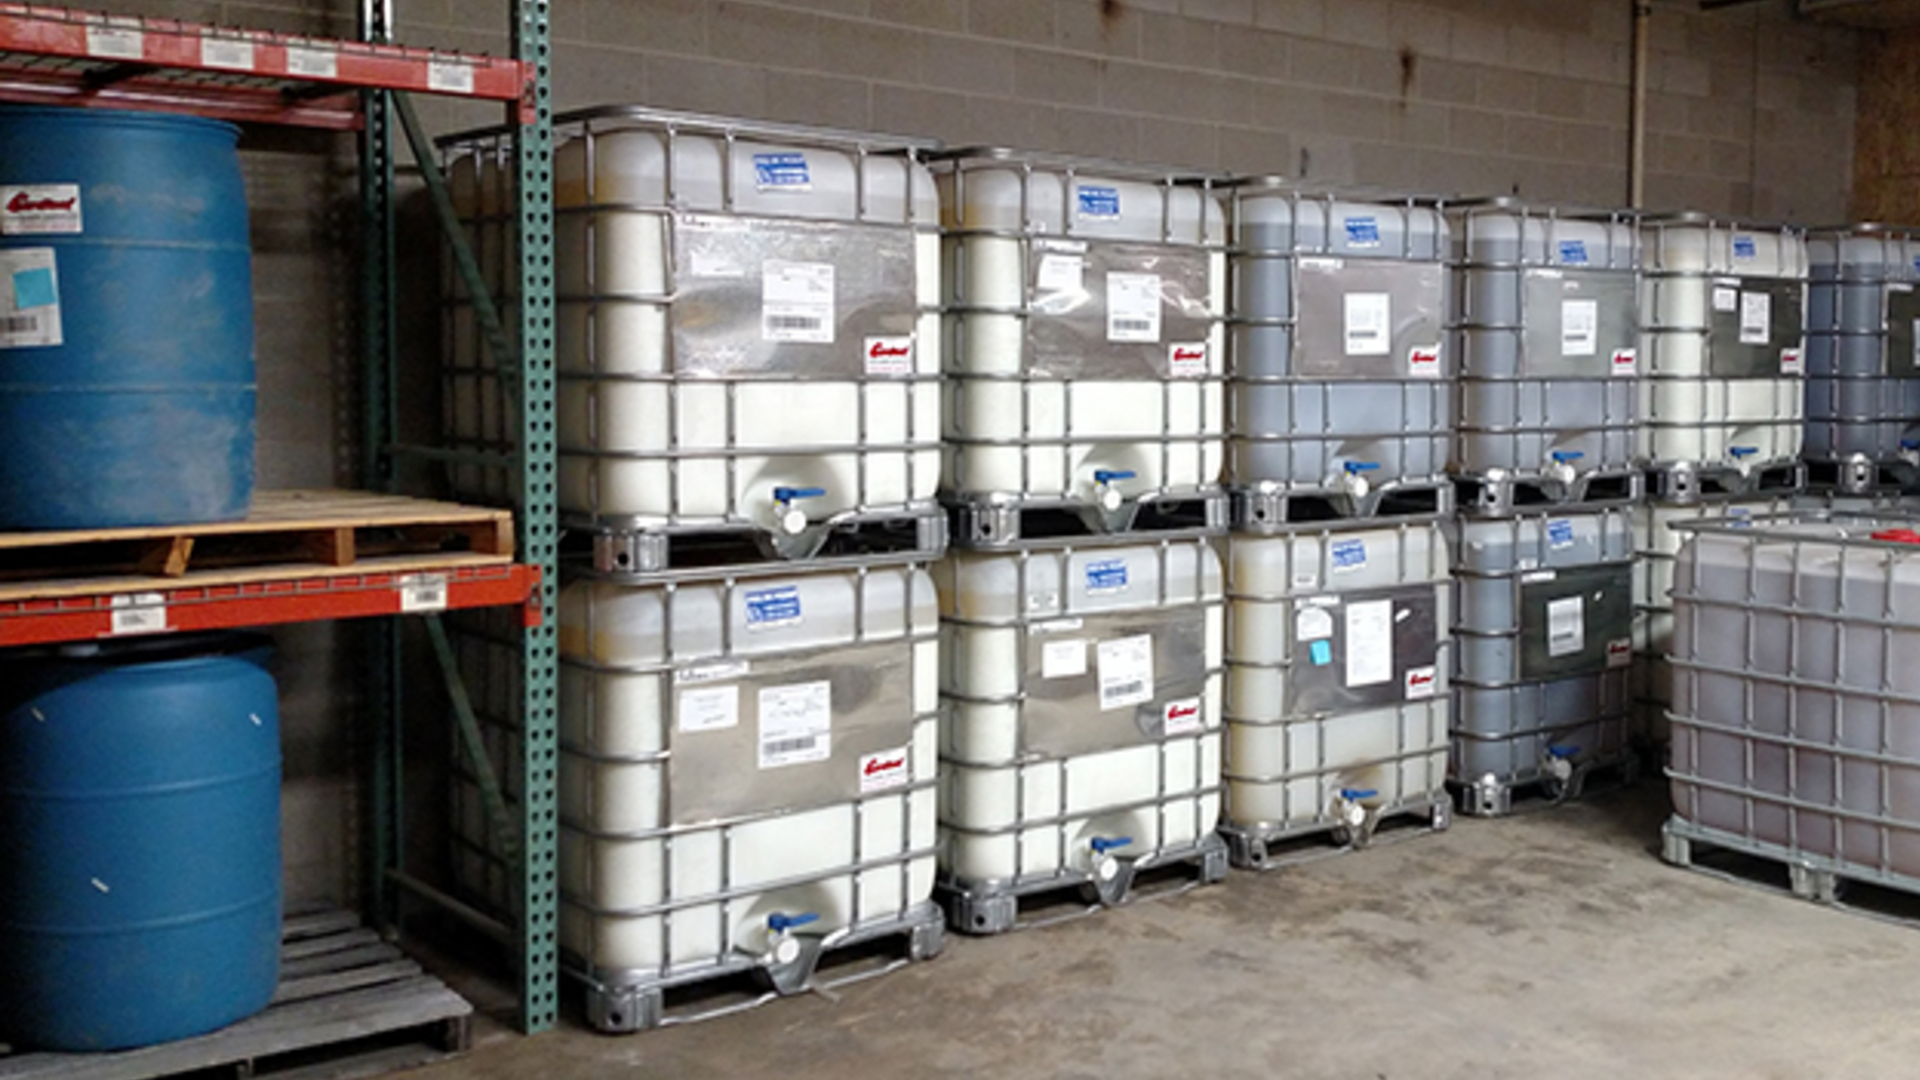 A picture showing liquid polymer totes stacked on top of each other and liquid polymer drums on shelving in a warehouse.